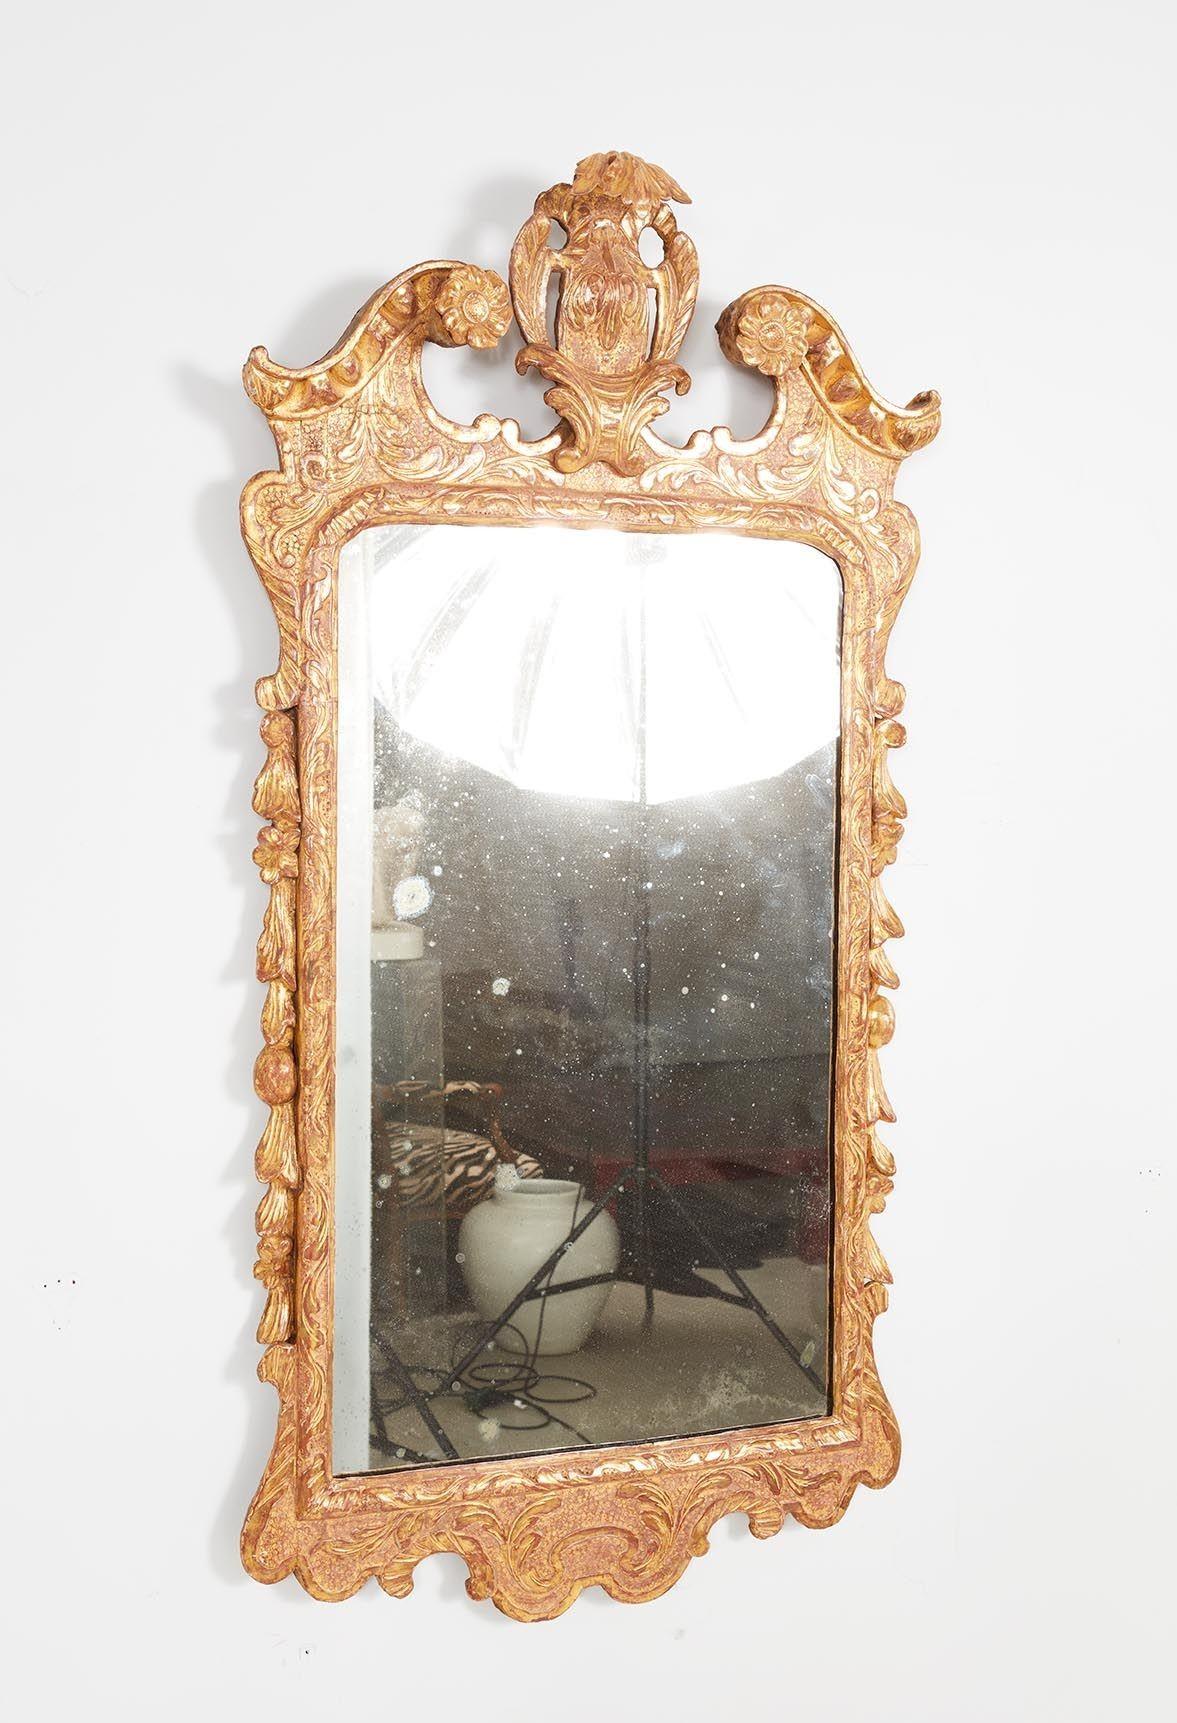 Good George II carved wood and gilt gesso mirror, the central cartouche flanked by swan neck pediment having egg and dart carved molded edge, the body with foliate relief carving on a punched ground, the sides with garland drops with leaves, fruit